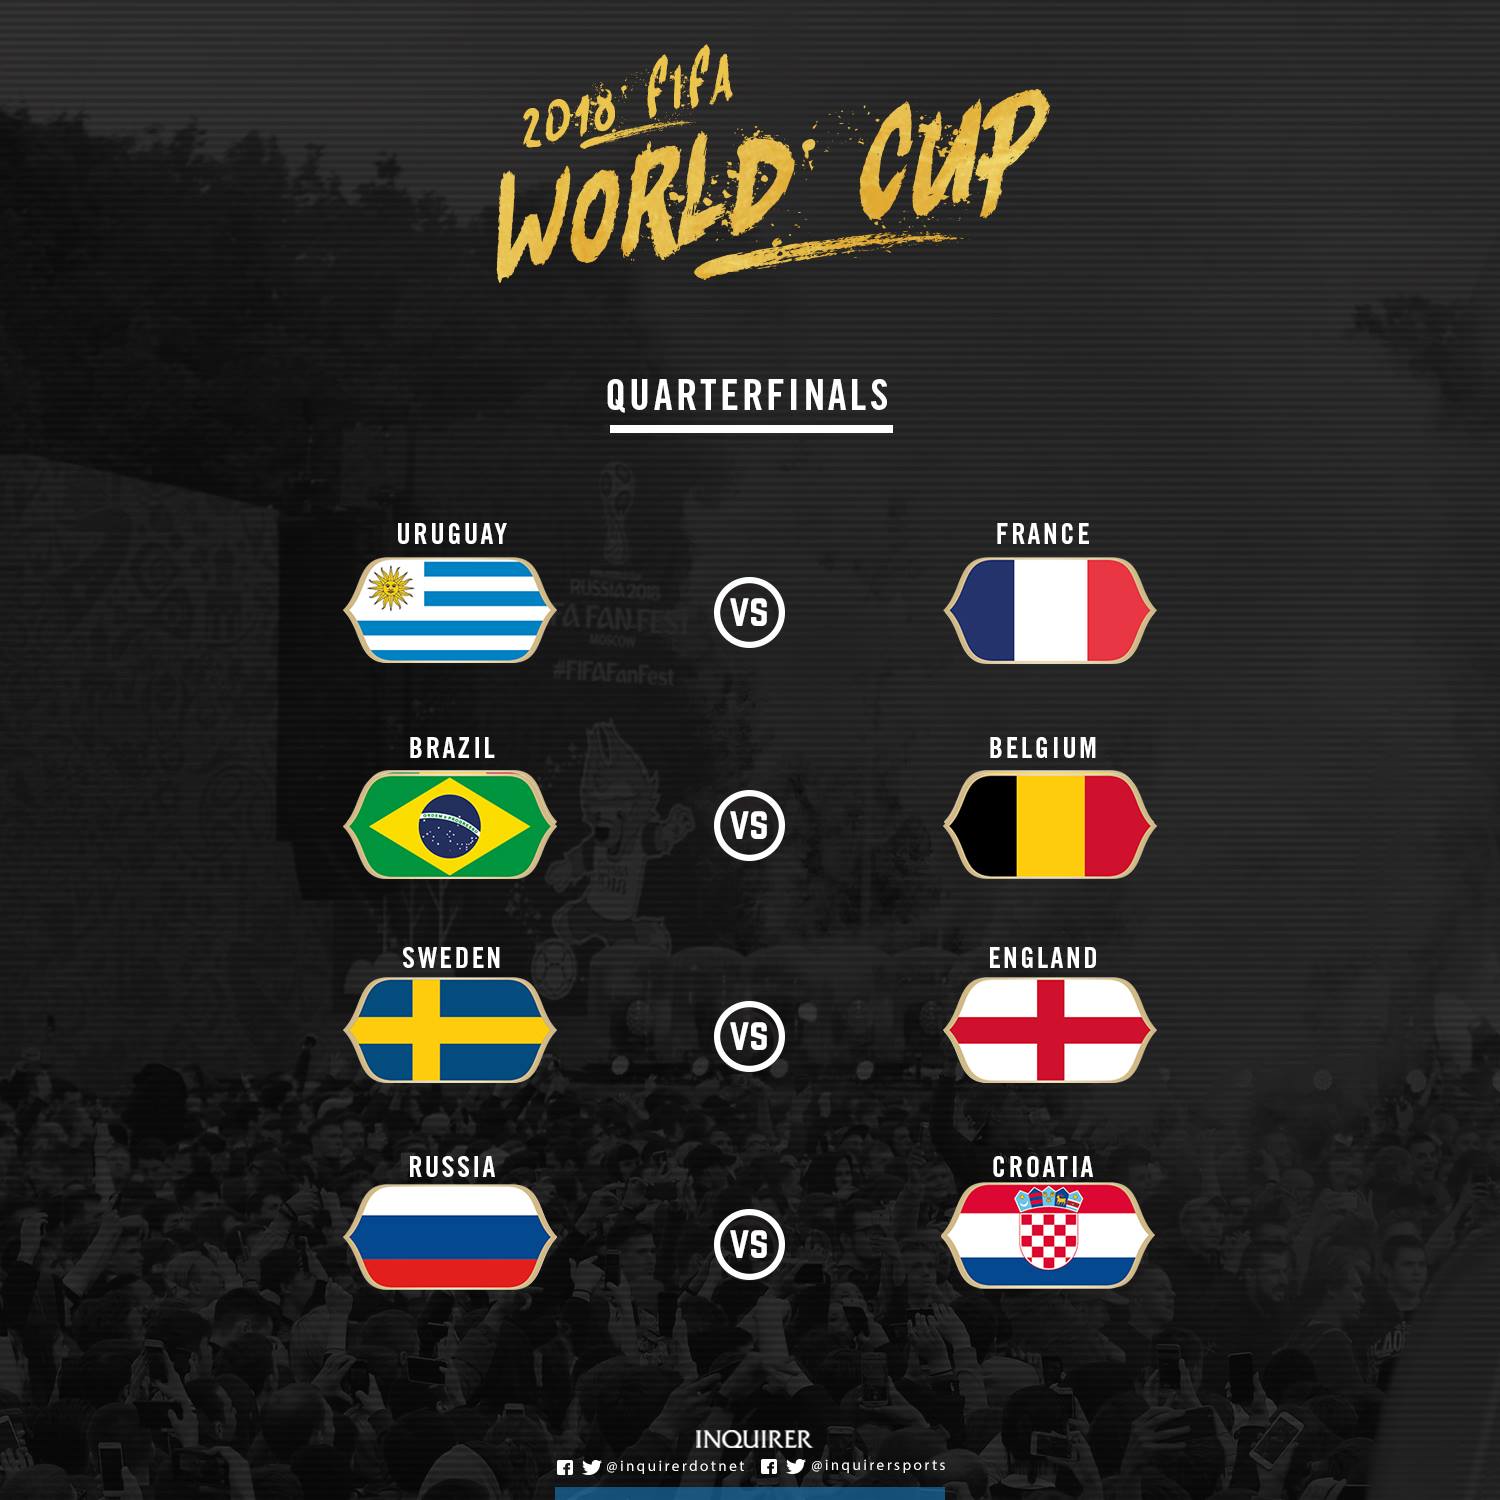 How do the World Cup quarterfinalists compare?